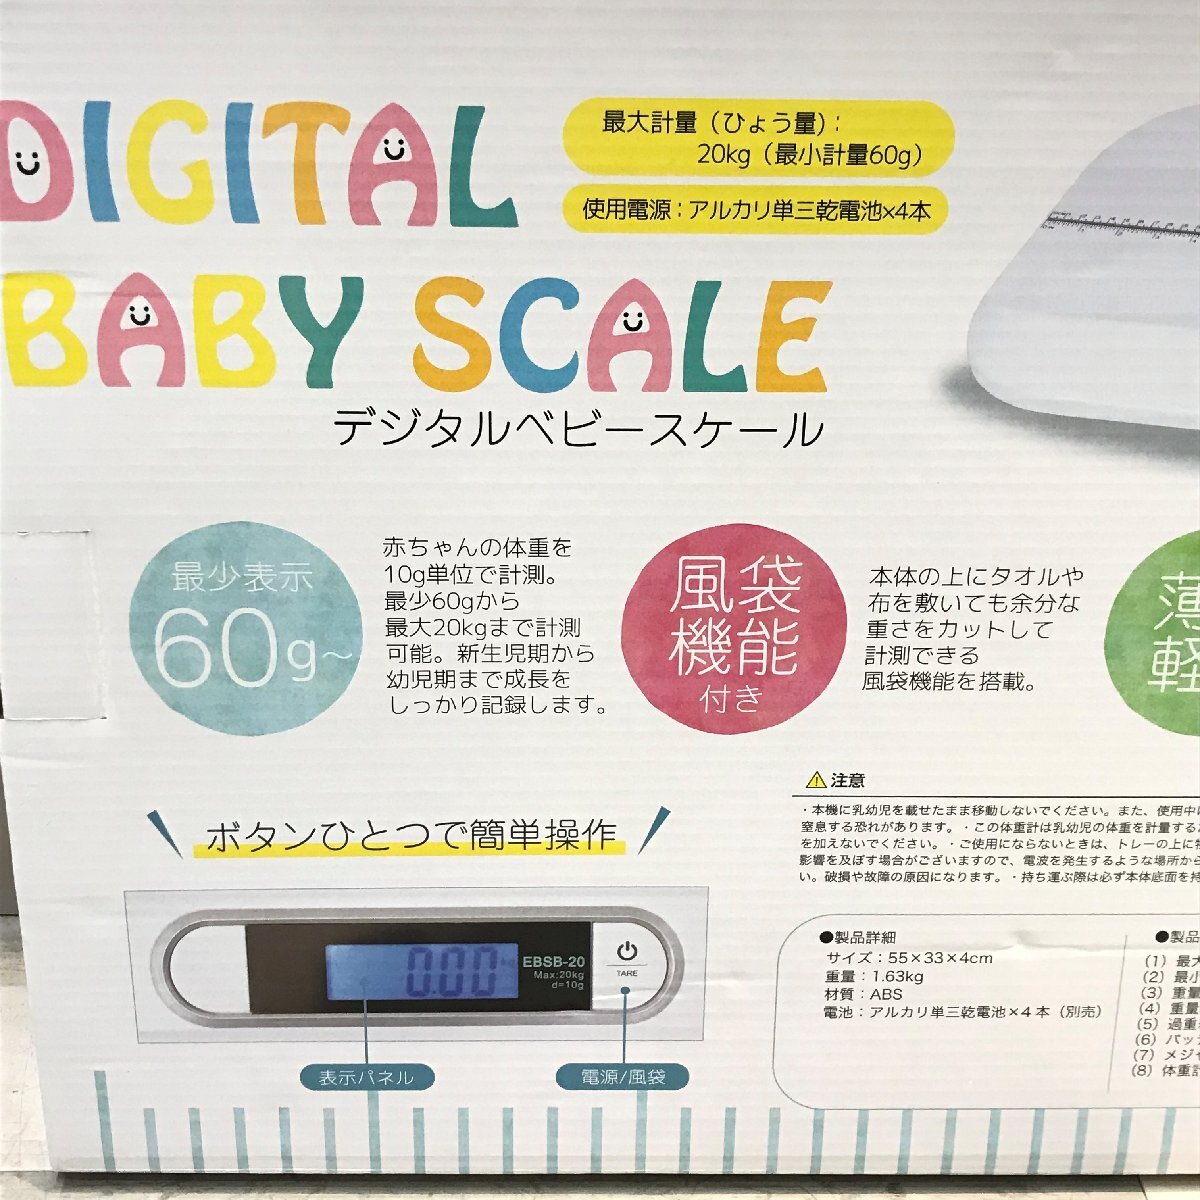  digital baby scale most small measurement 0.06kg~ maximum measurement 20kg AA battery * user's manual attaching EBSB-20 electrification verification settled fe ABW